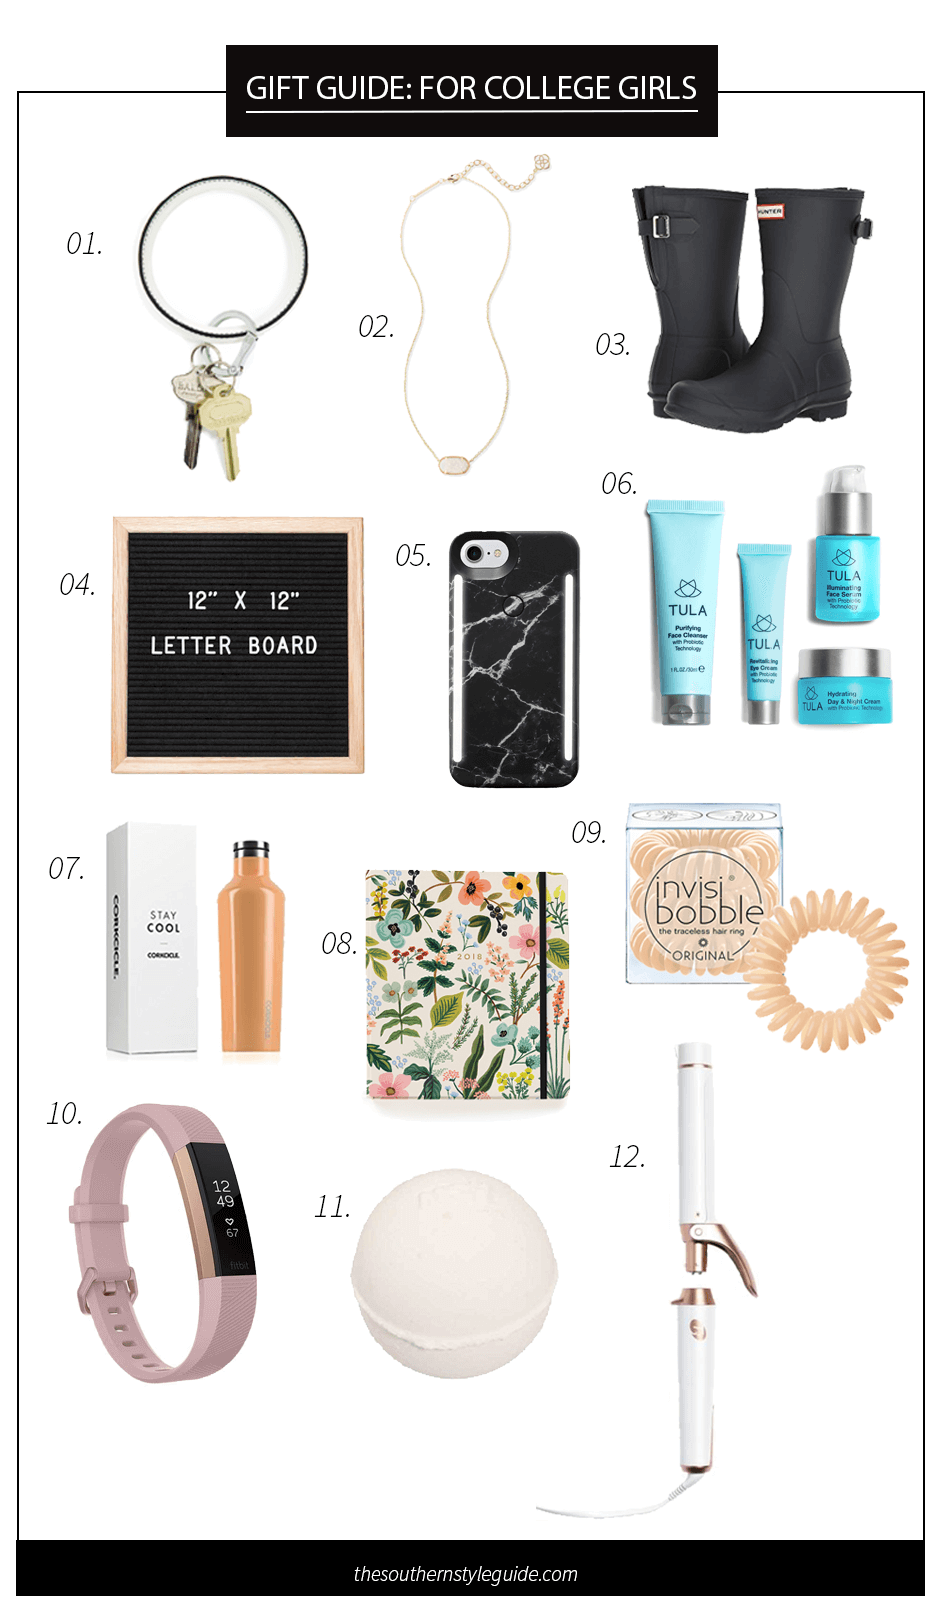 Gift Guide, College Girl, Gifts, Holiday, Christmas